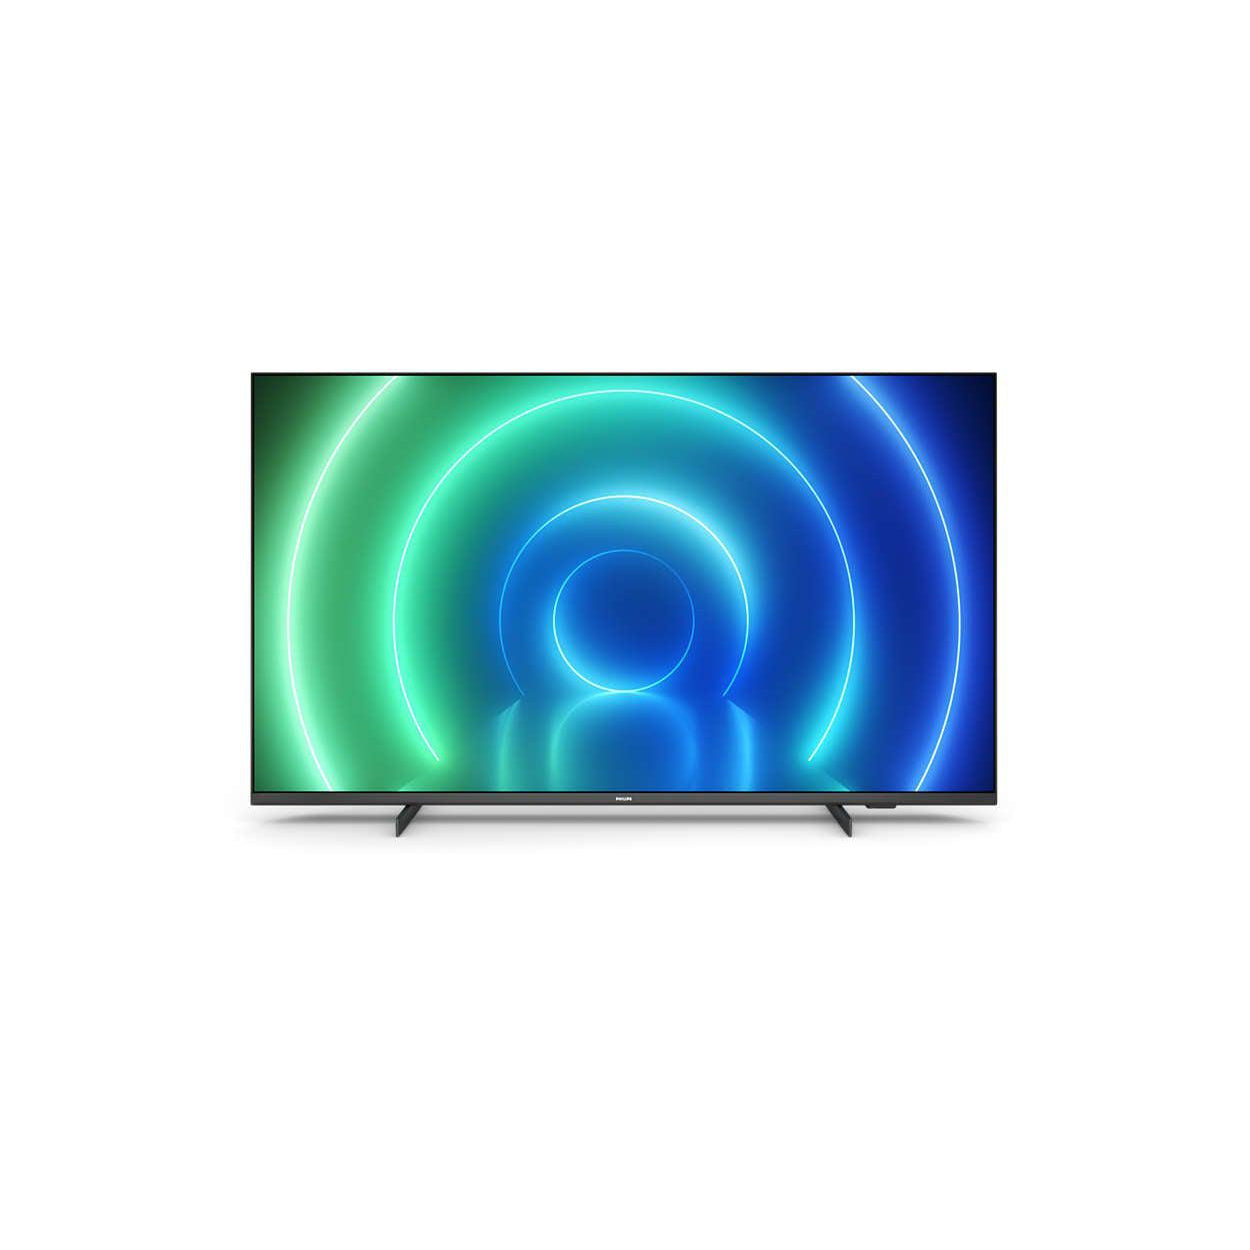 Refurbished Philips 55 Inch 55PUS7506 Smart 4K UHD HDR LED Freeview TV (2021 Model)